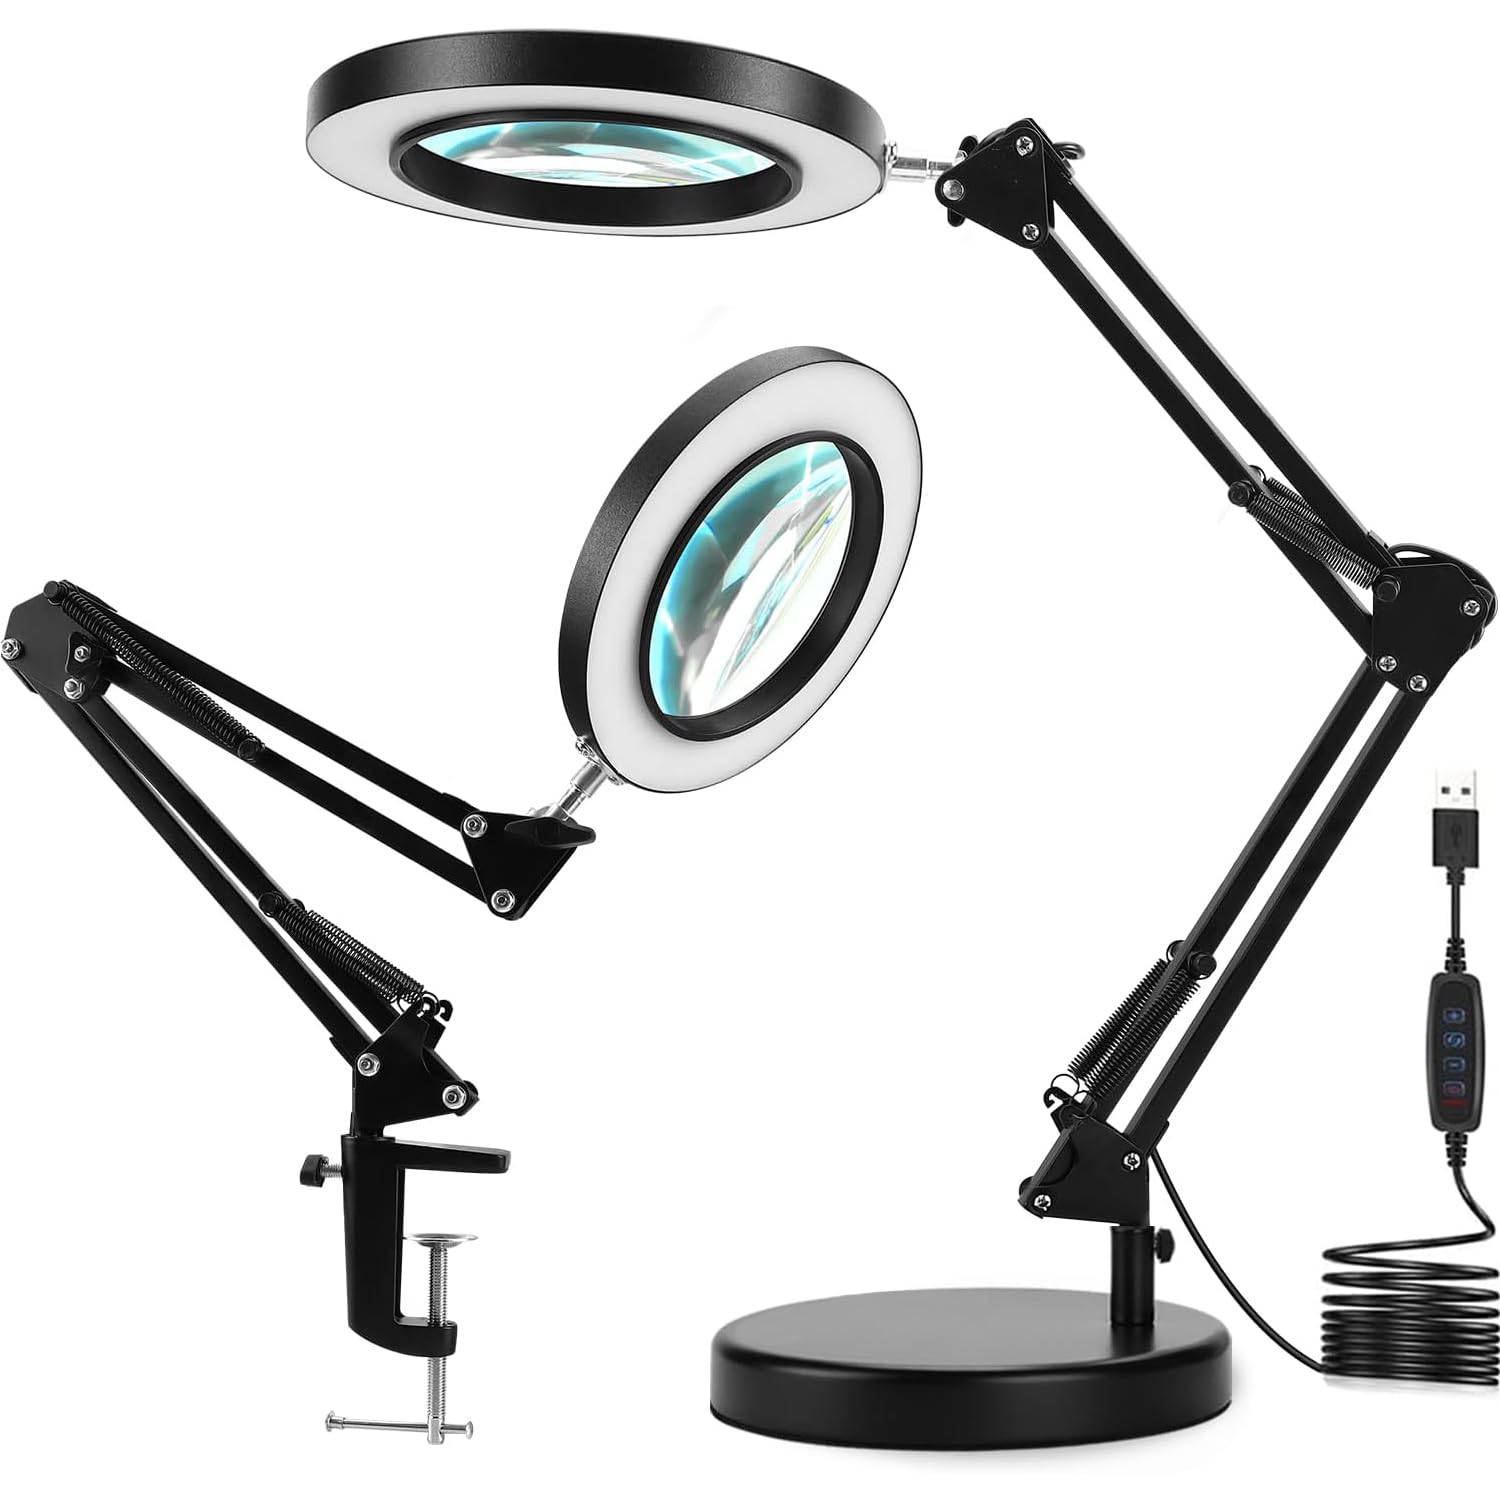 Dotlite Magnifying Glass with Light and Stand,2 in 1 Clamp 10X Magnifying Lamp, Craft Light Lamp Adjustable with 3 Color Modes LED Magnifier with Light for Reading Crafts Repair Close Work